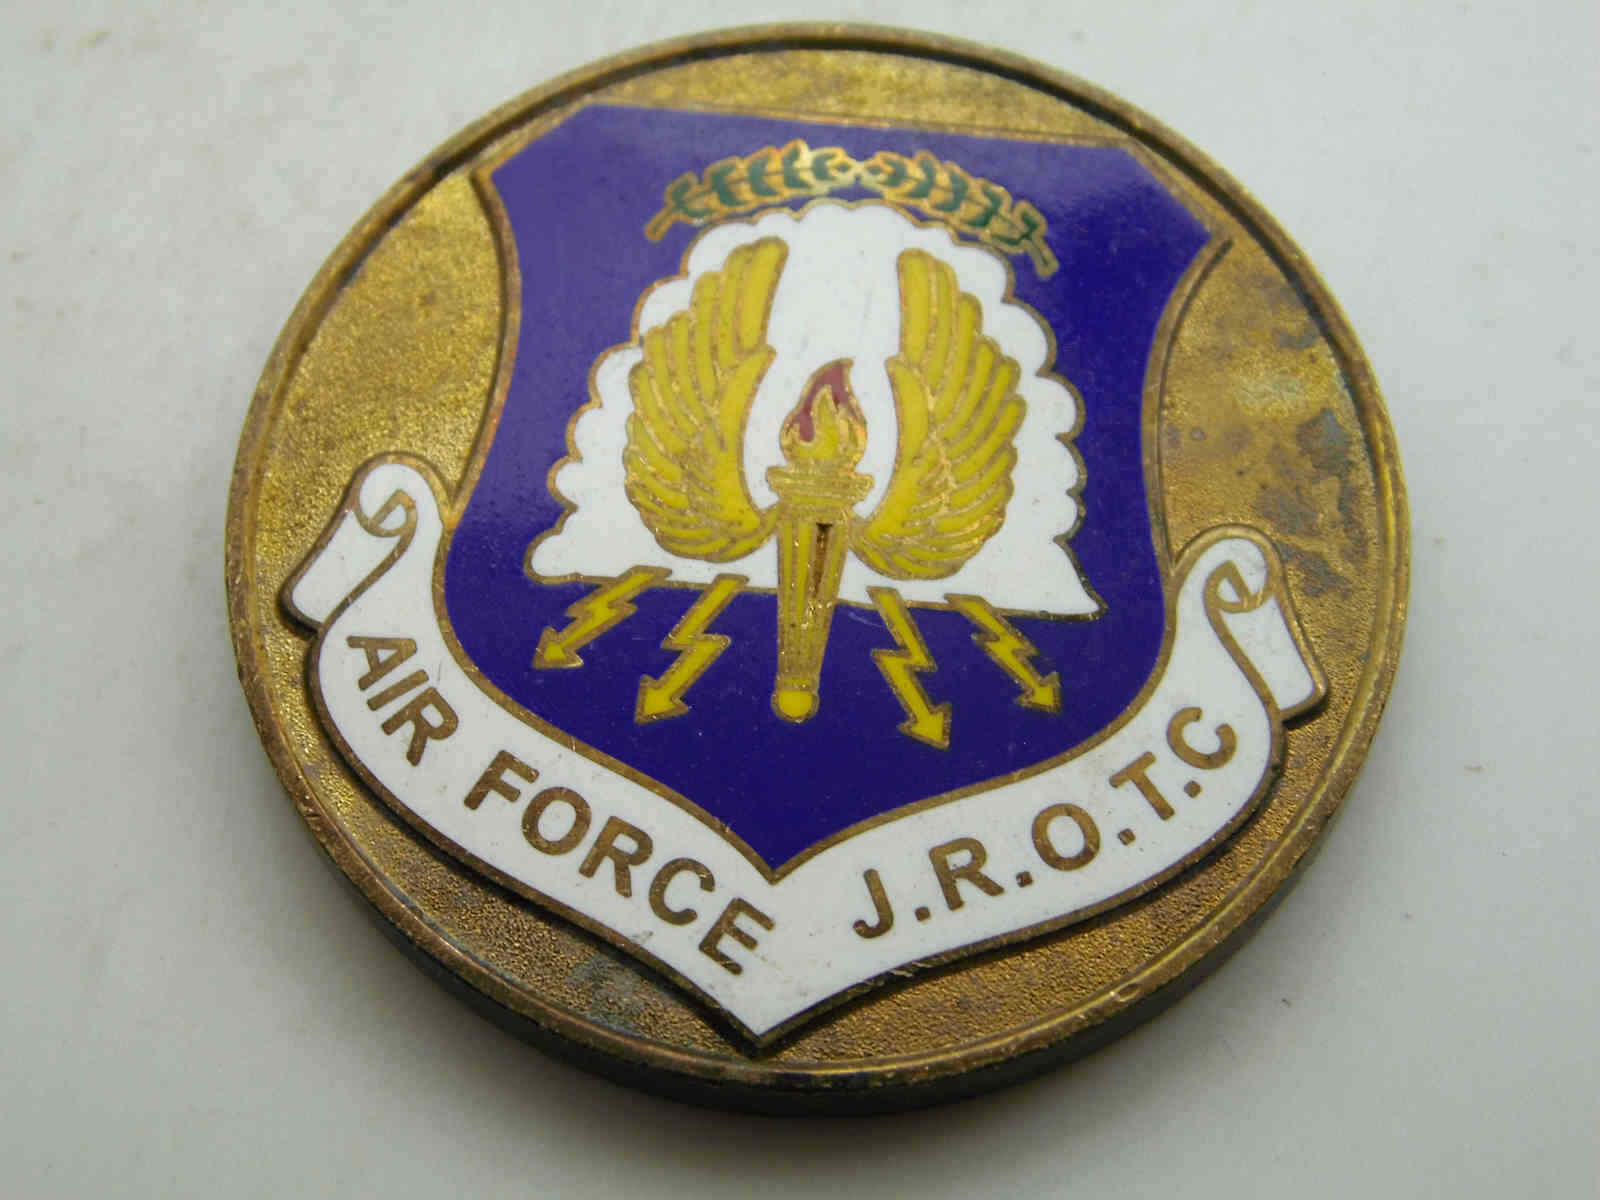 AIR FORCE J.R.O.T.C SPRINGBORO HIGH SCHOOL OH-081 CHALLENGE COIN